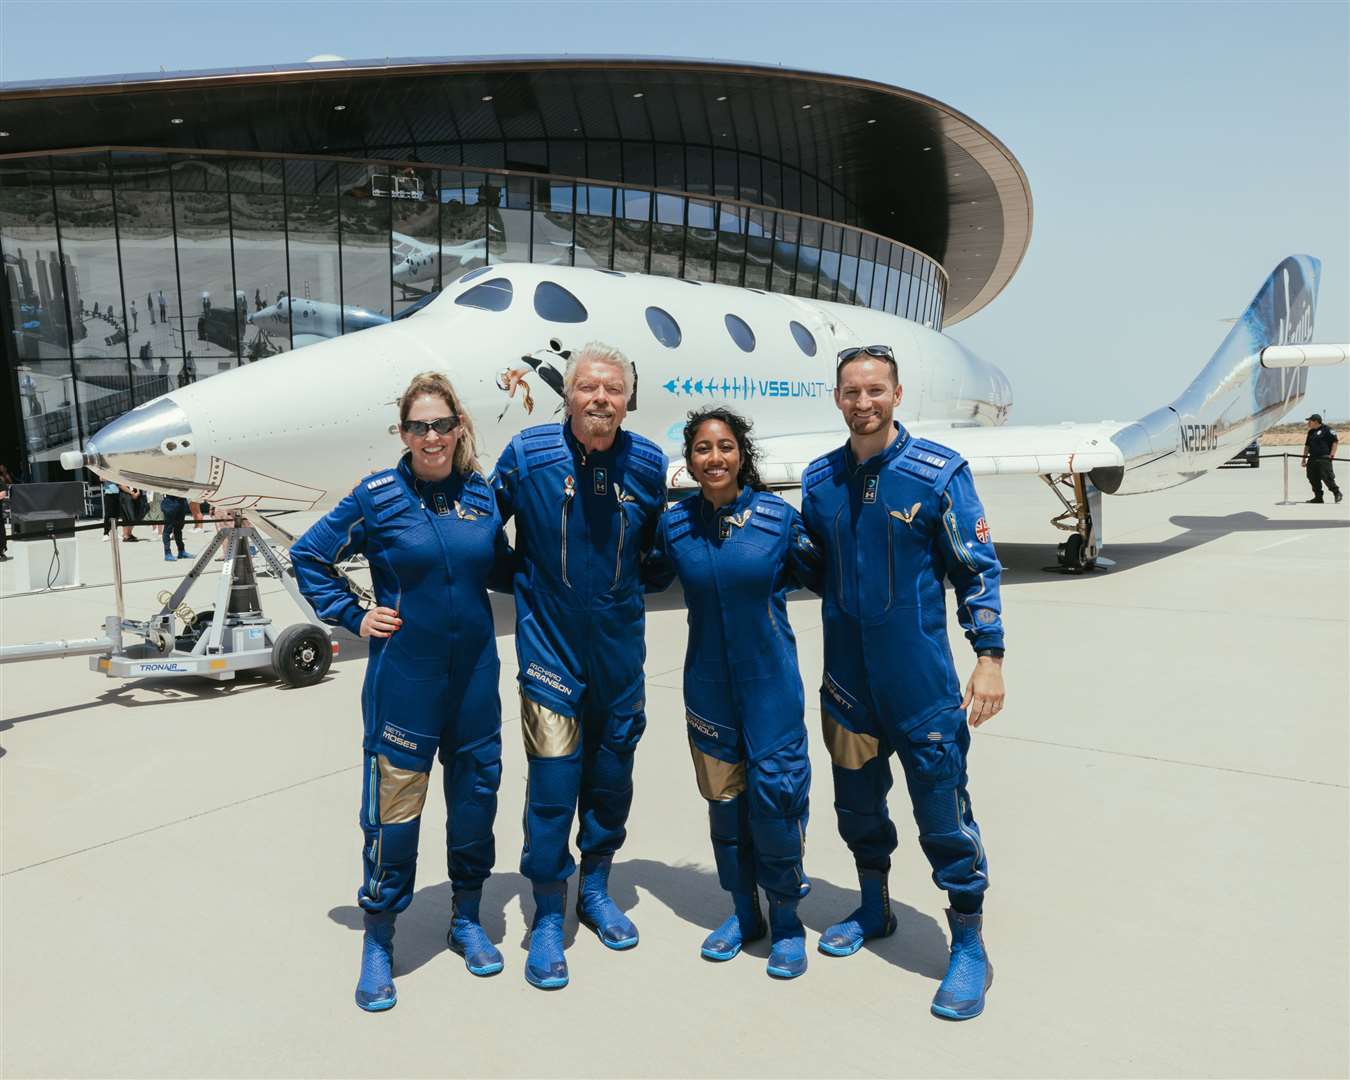 Unity 22 mission specialists (from left) Beth Moses, chief astronaut instructor; Sir Richard Branson, Virgin Galactic founder; Sirisha Bandla, vice president of government affairs and research operations; and Colin Bennet, lead operations engineer.